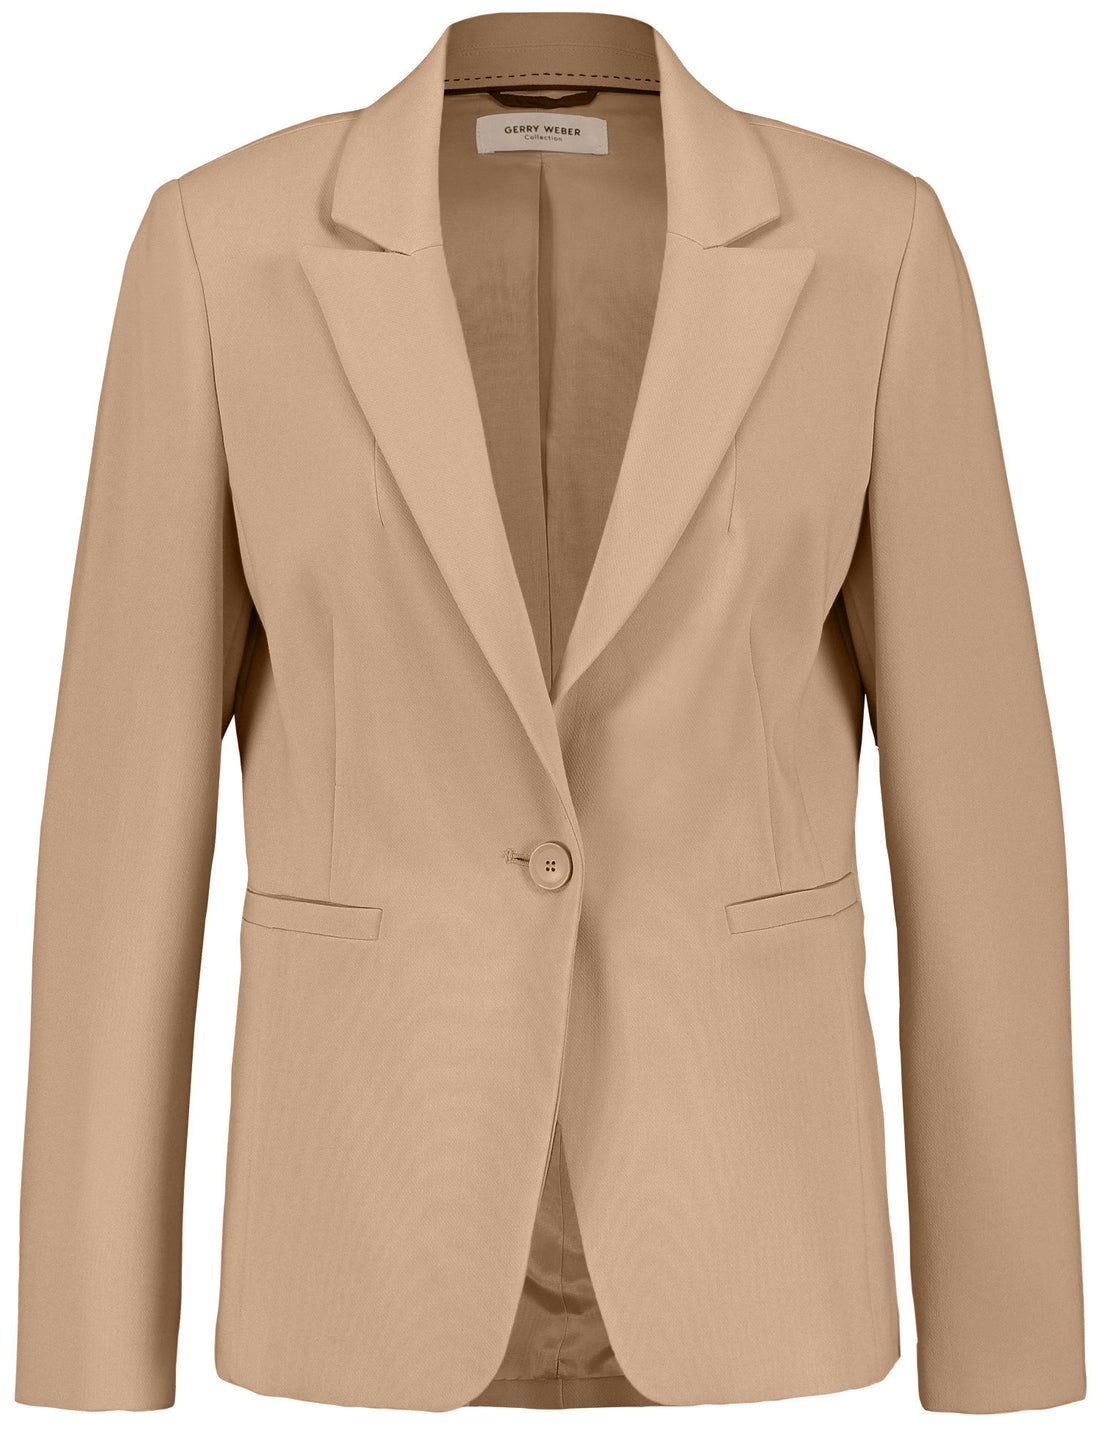 Flowing Blazer With Added Stretch For Comfort_935021-31340_90540_02